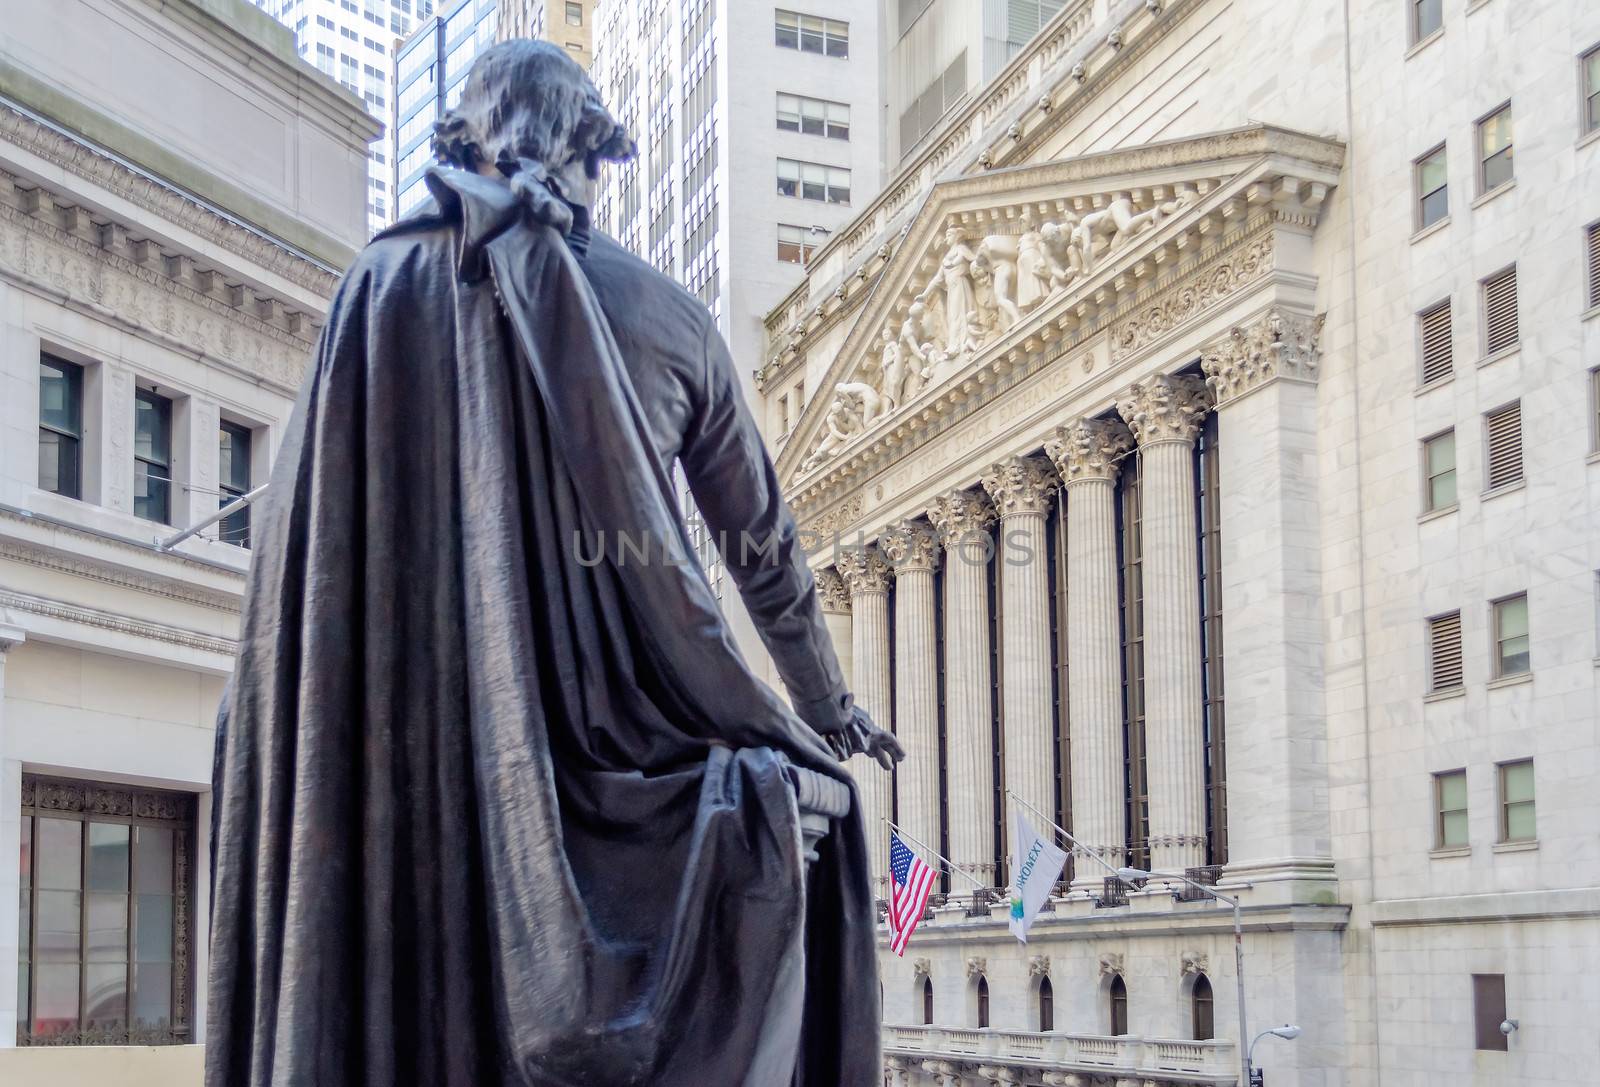 NEW YORK - MAY 27: The historic Wall Street facade from behind G.Washington statue in Federal Hall, May 27, 2013. Wall Street is the icon of global capitalism.